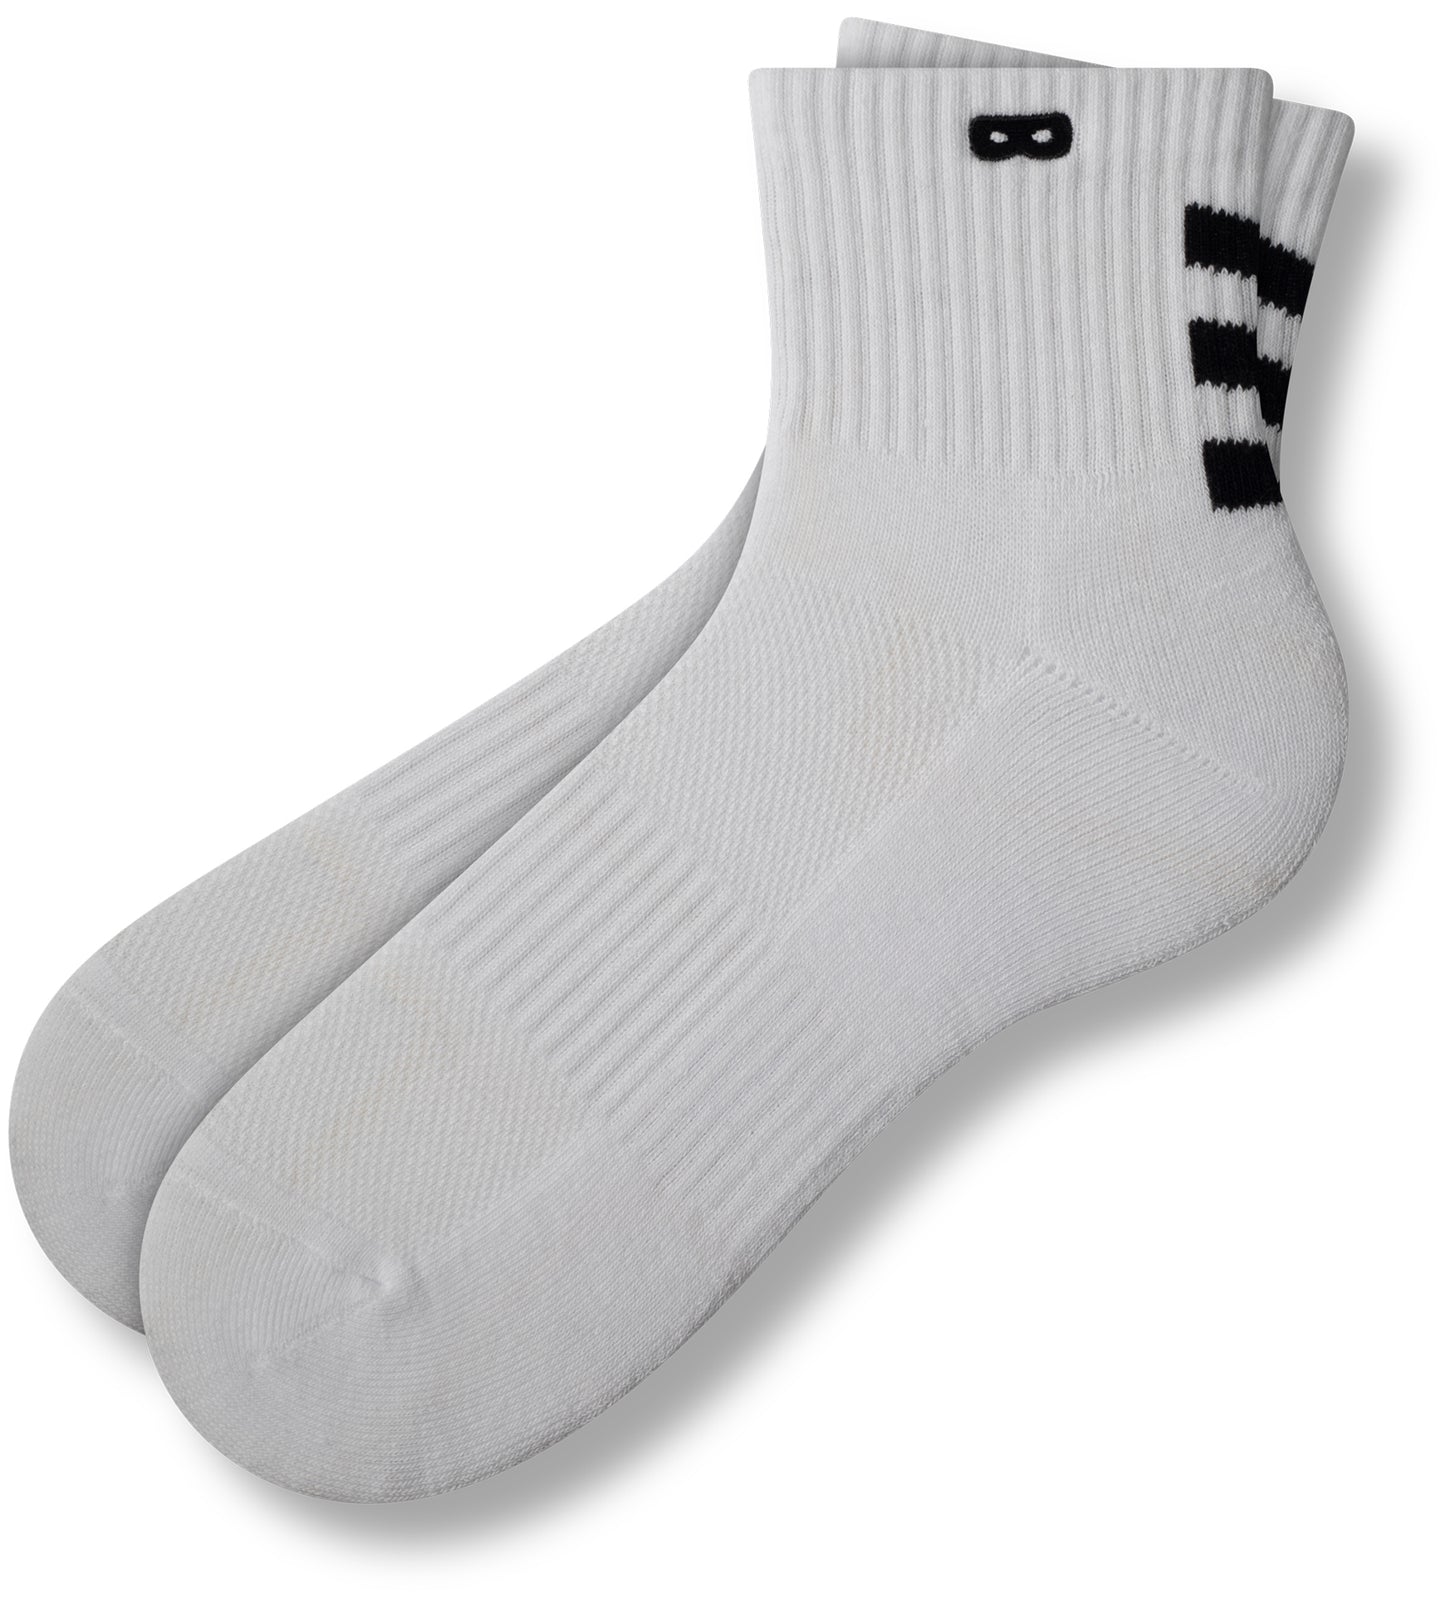 Pair of Thieves Men's Hustle Ankle Socks (3 Pack) - Performance Athletic  Running Socks, Quick Dry, Anti-Odor, 4-Way Stretch at  Men's Clothing  store